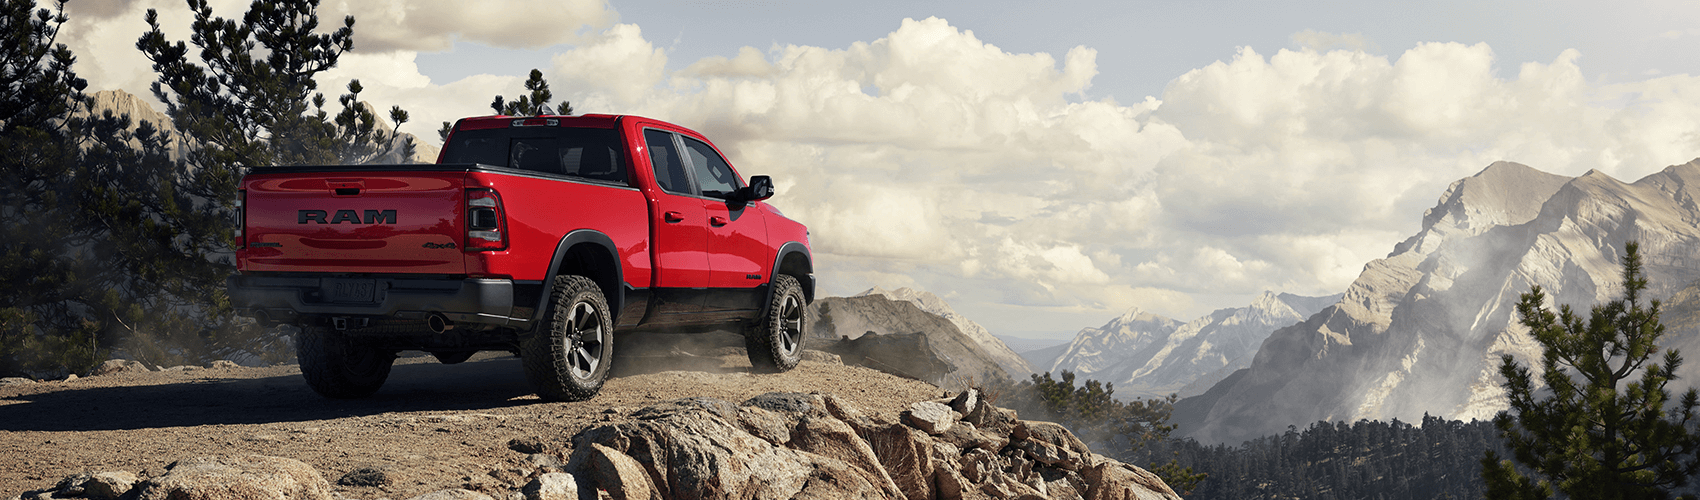 2020 Ram 1500 Rebel Flame Red Distant Mountain